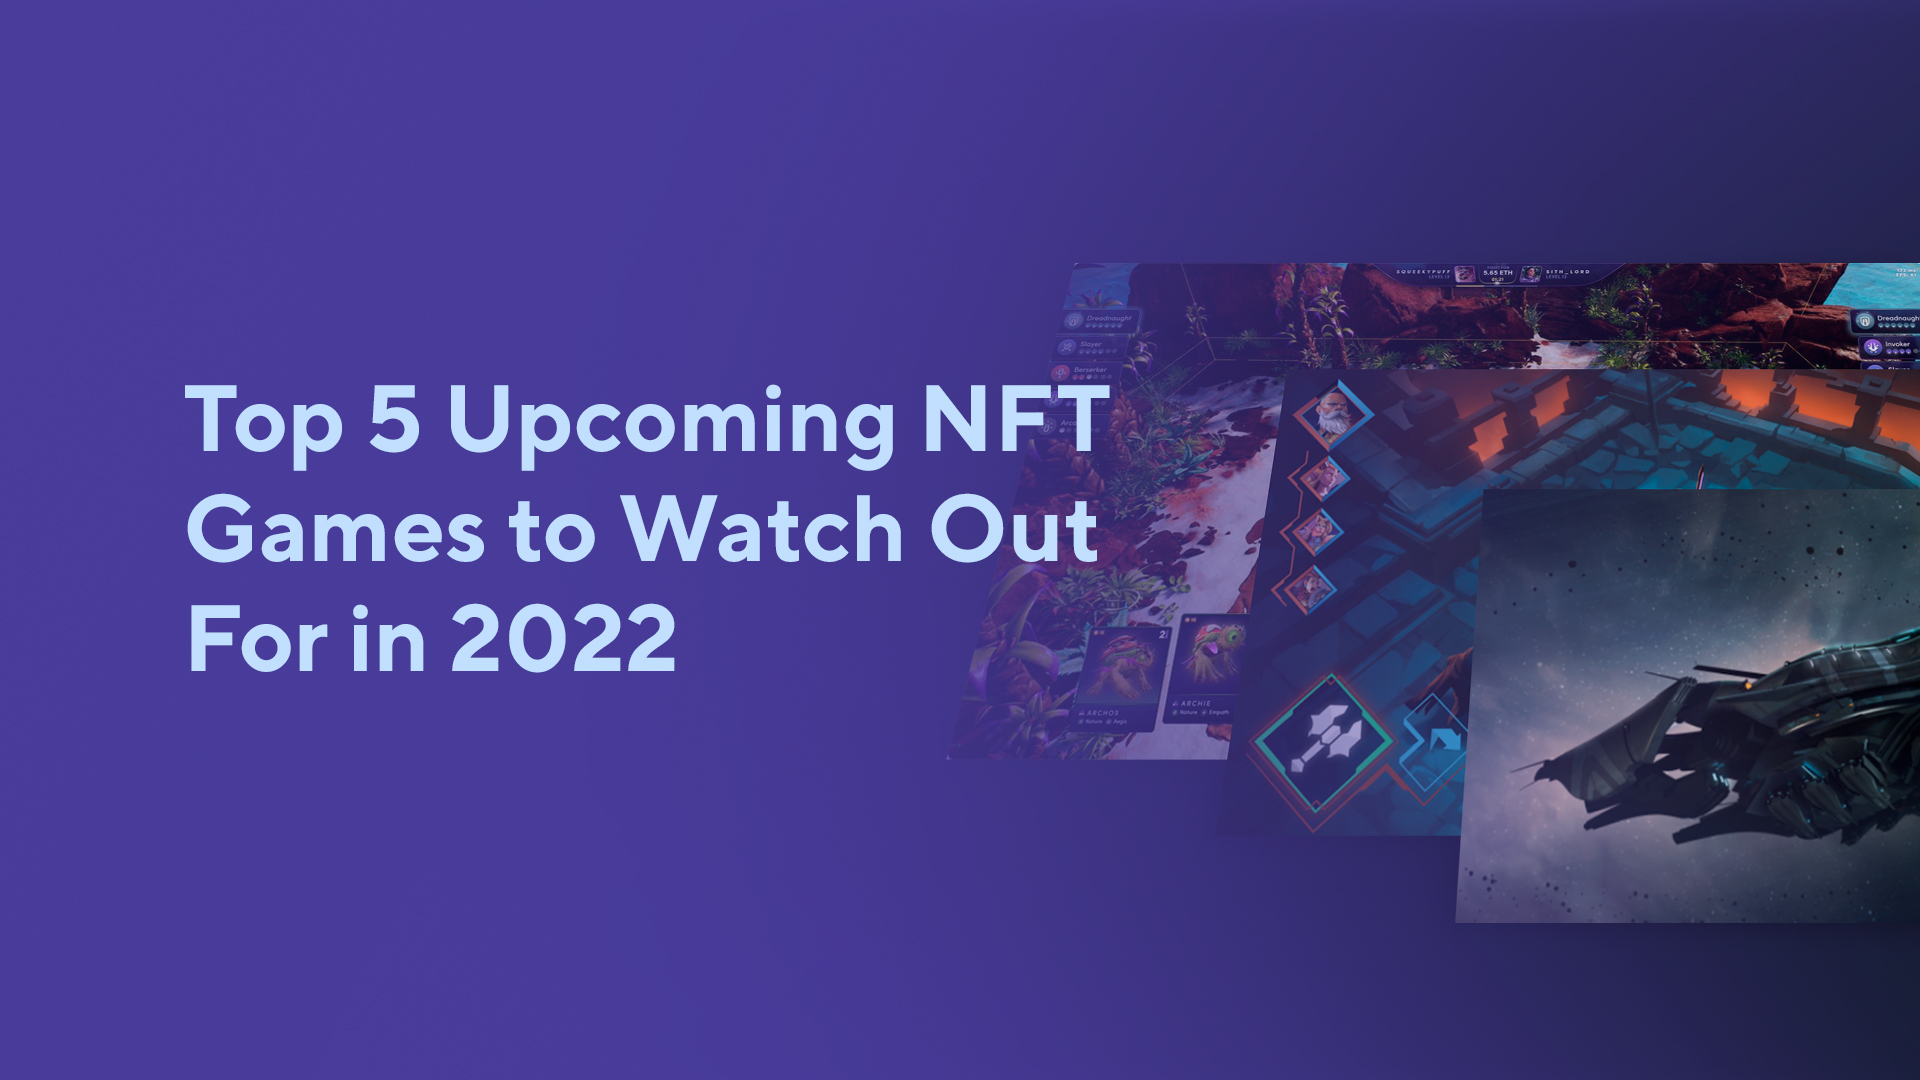 Top 5 Upcoming NFT Games to Watch Out For in 2022